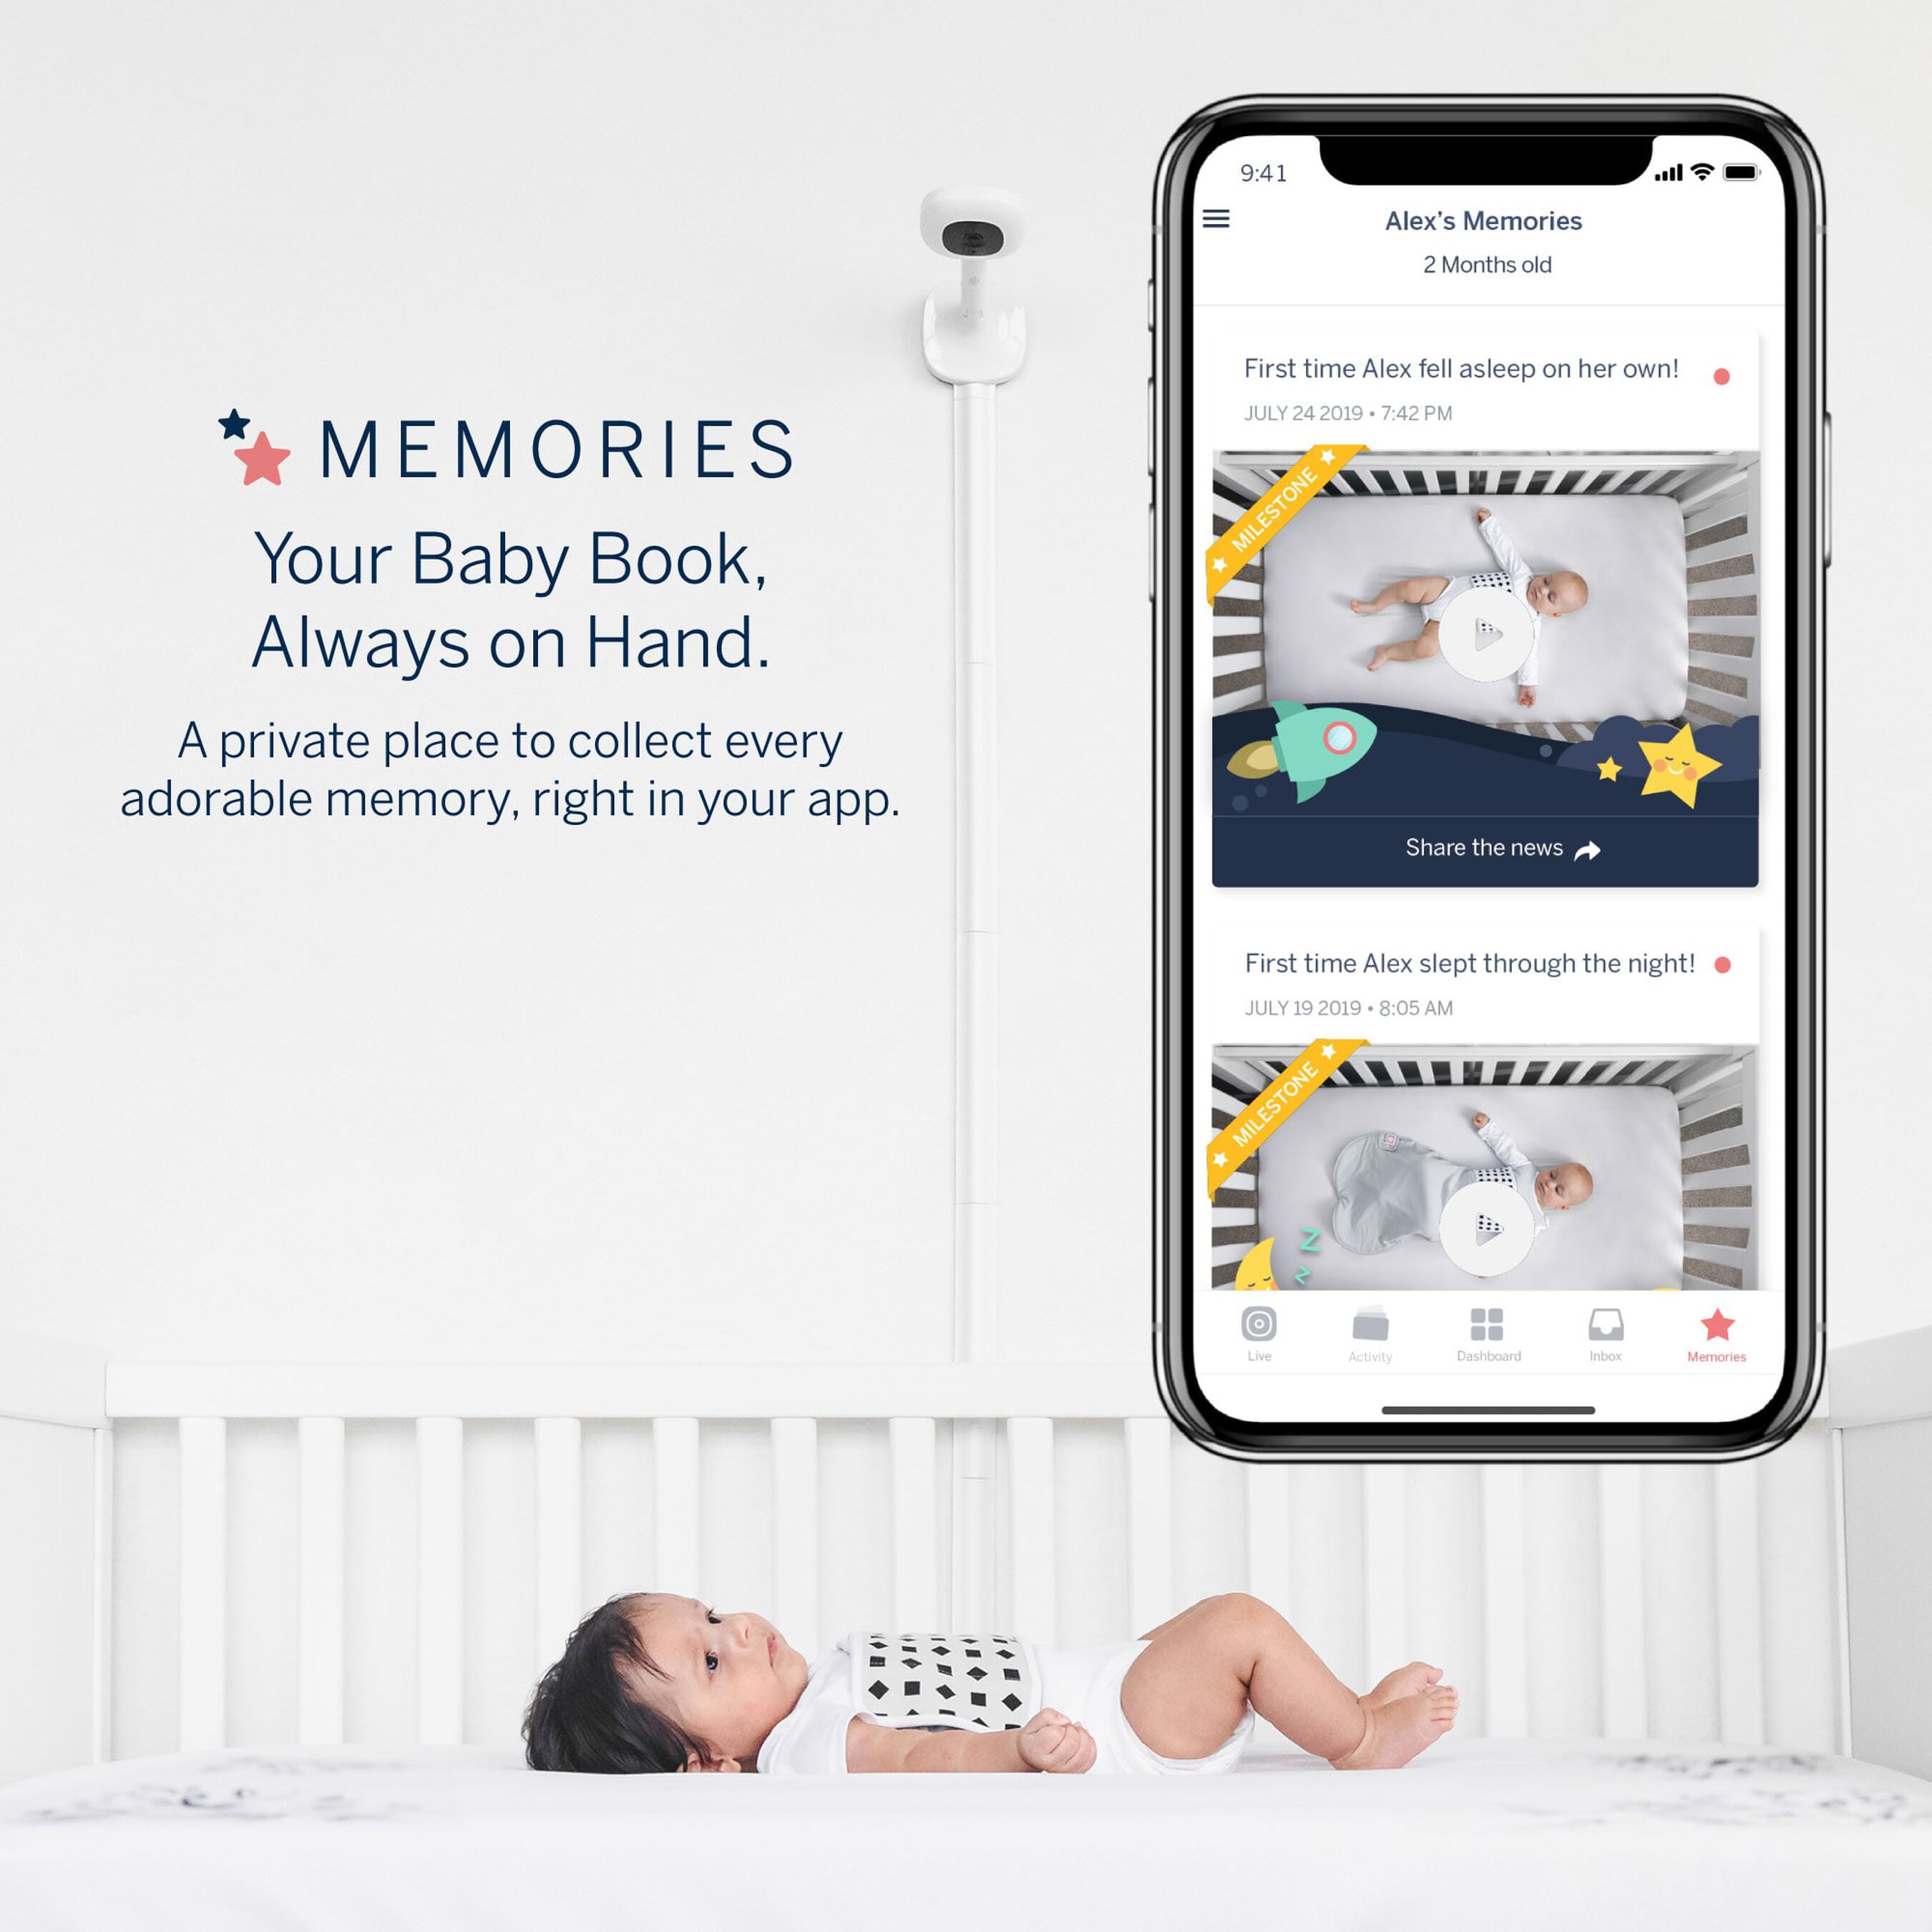 Nanit Pro Complete Baby Monitoring System